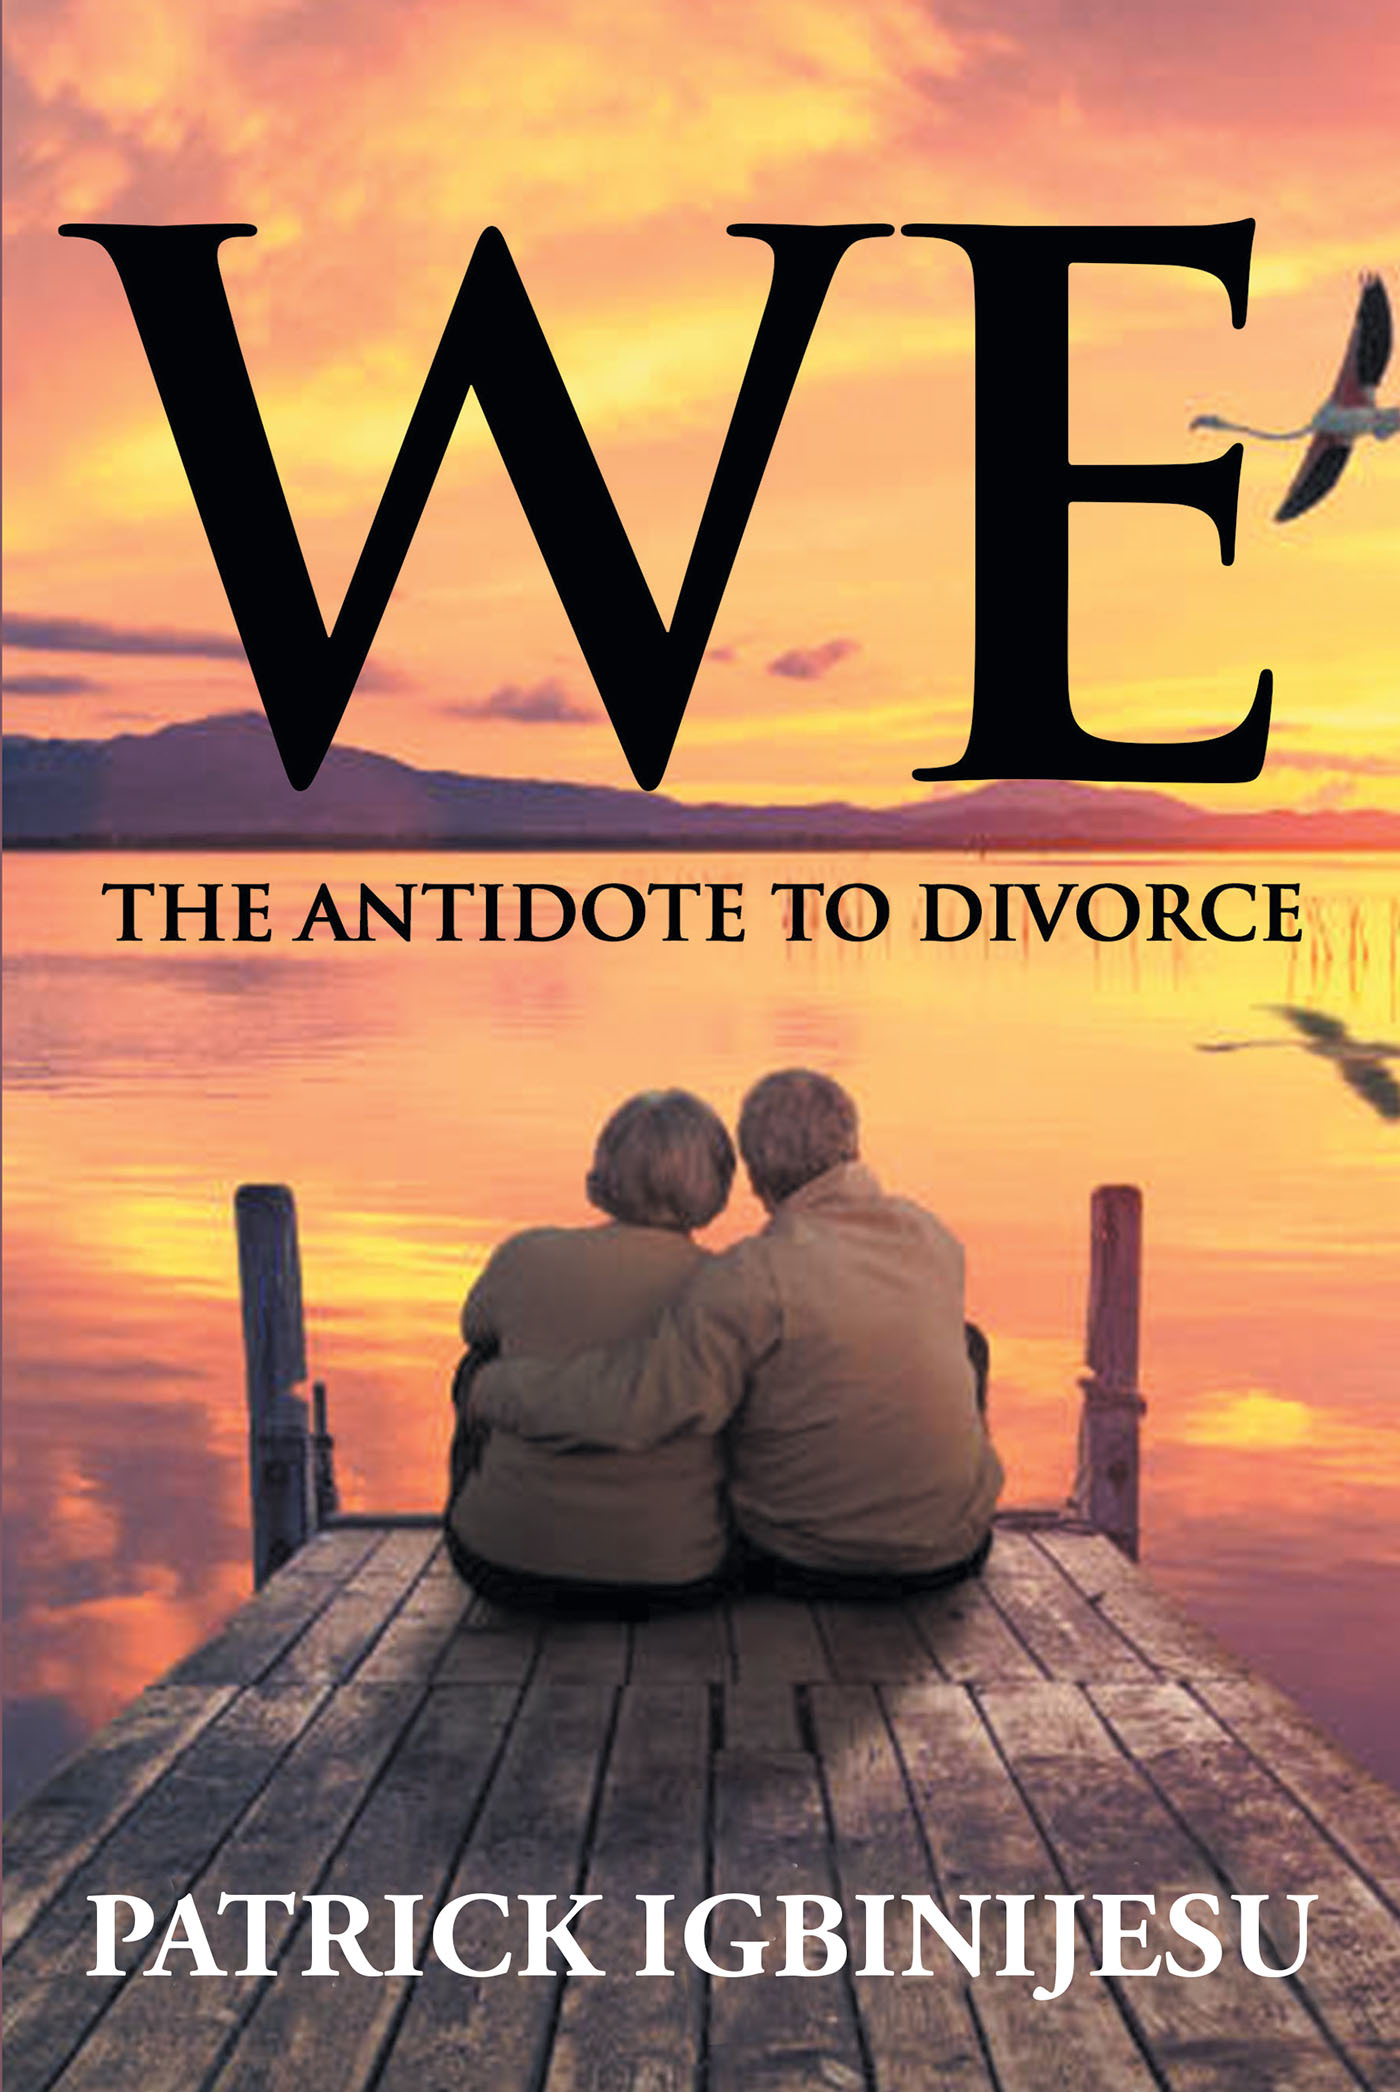 Patrick Igbinijesu’s Newly Released “We: The Antidote to Divorce” is a Powerful Reminder of the Sanctity of the Marriage Vows